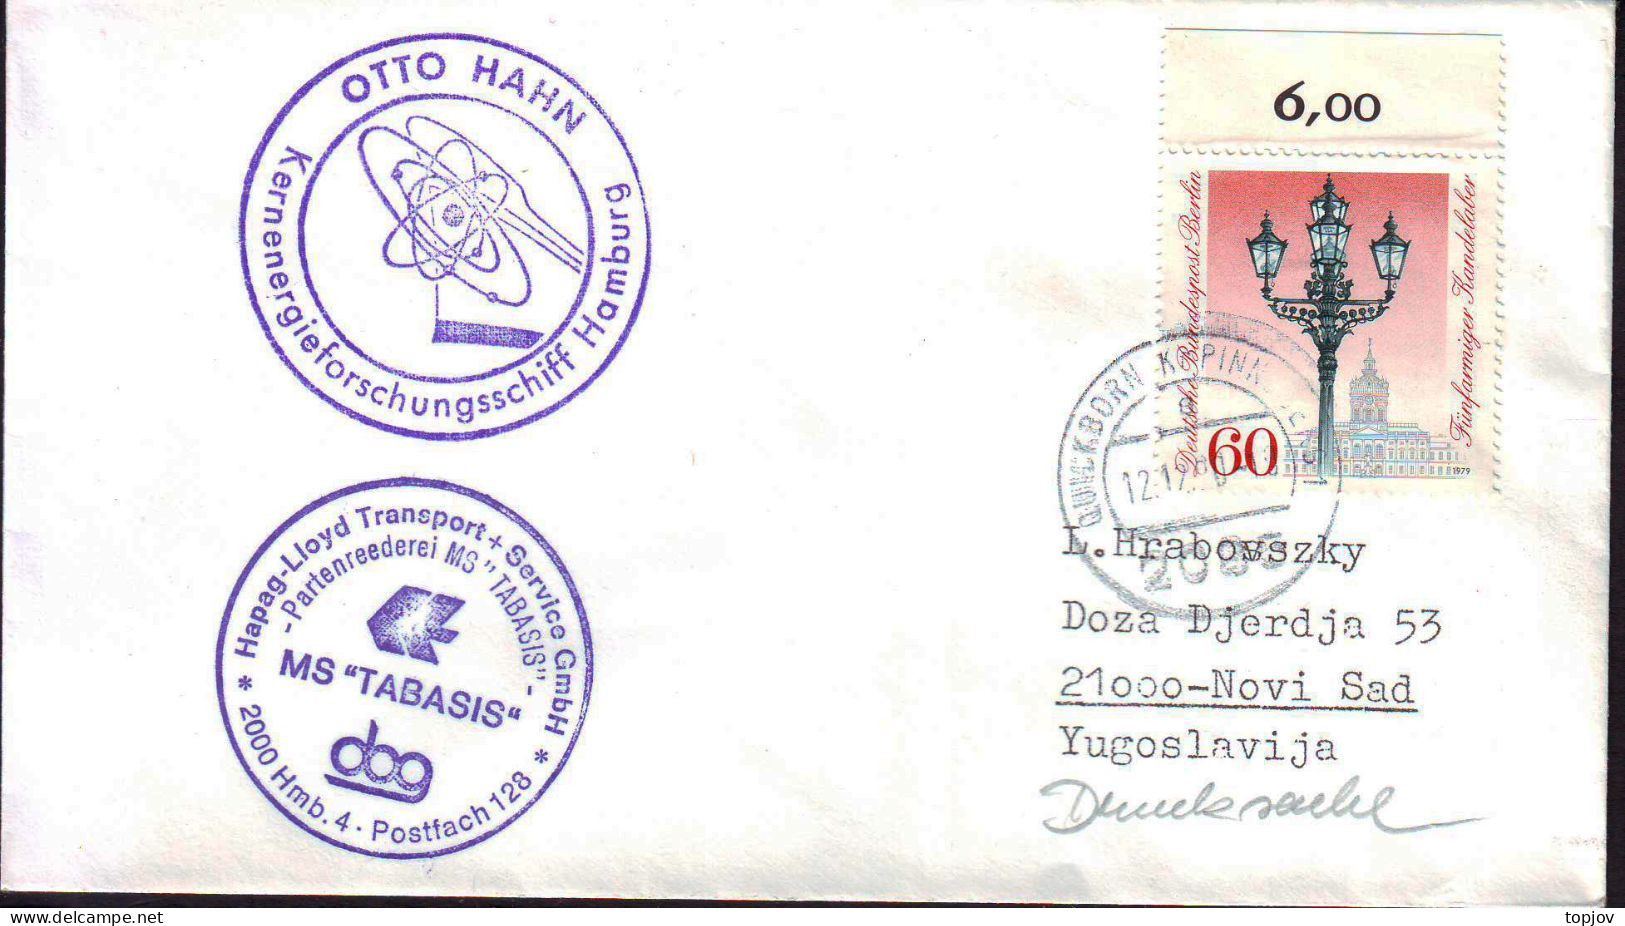 GERMANY - MS TABASIS - OTTO HAHN - 1980 - Polar Explorers & Famous People